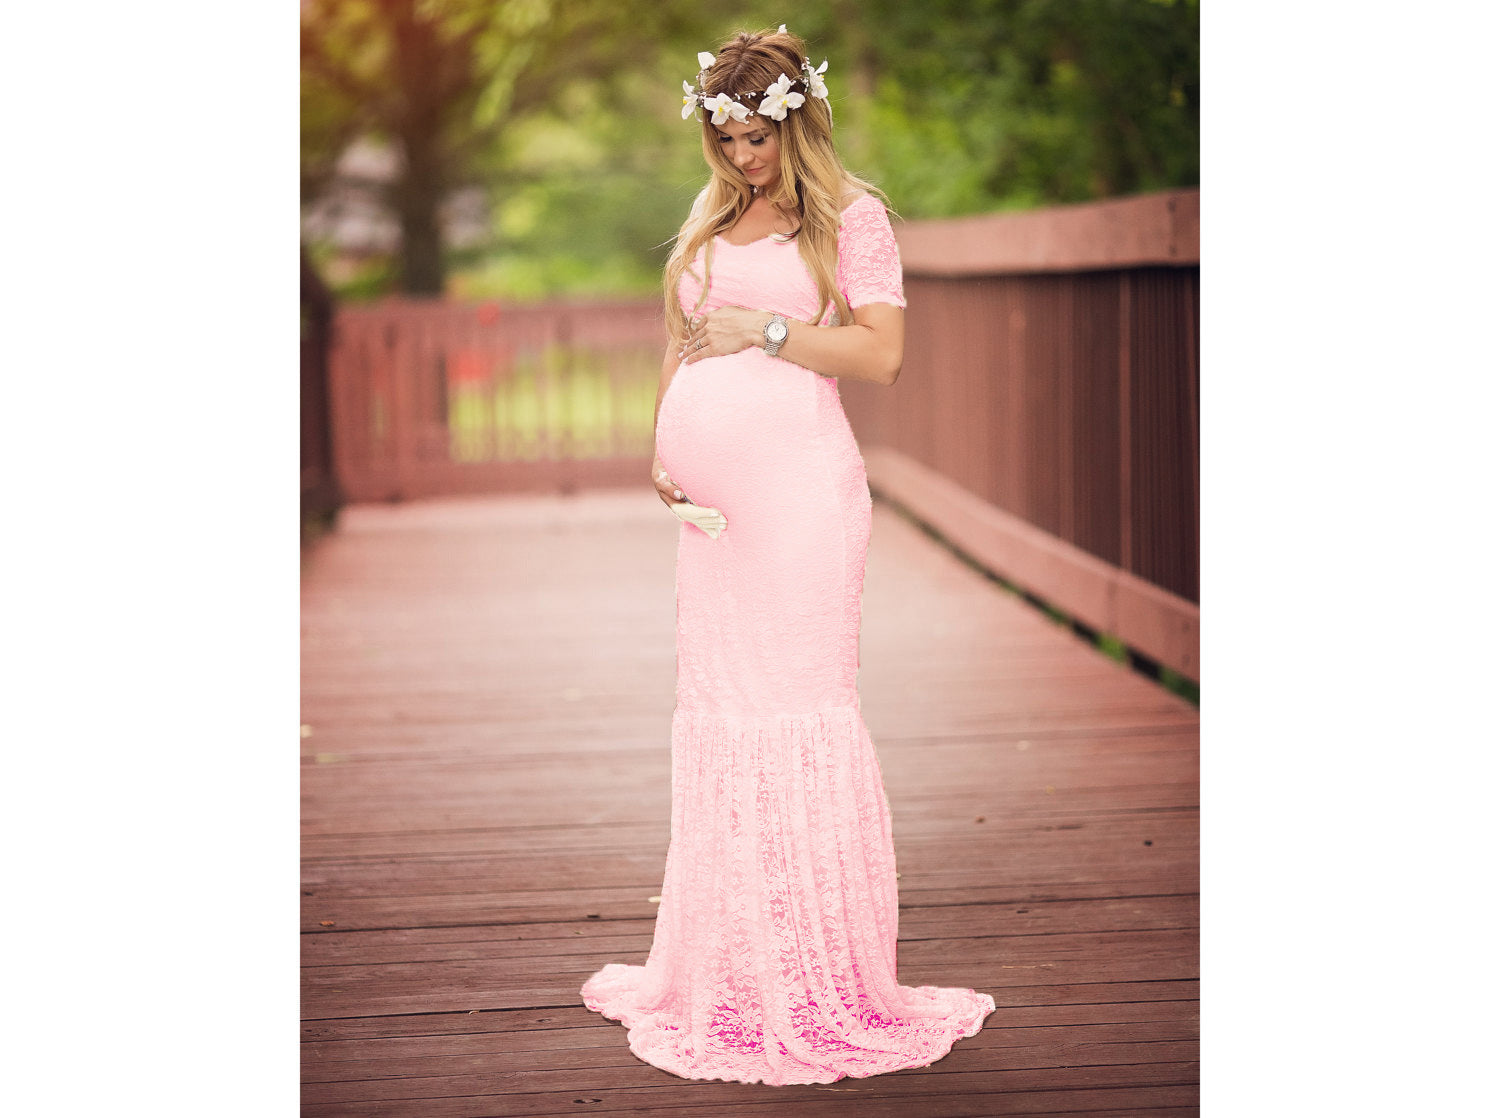 Maternity Gown Lace Photography Pregnancy Dress